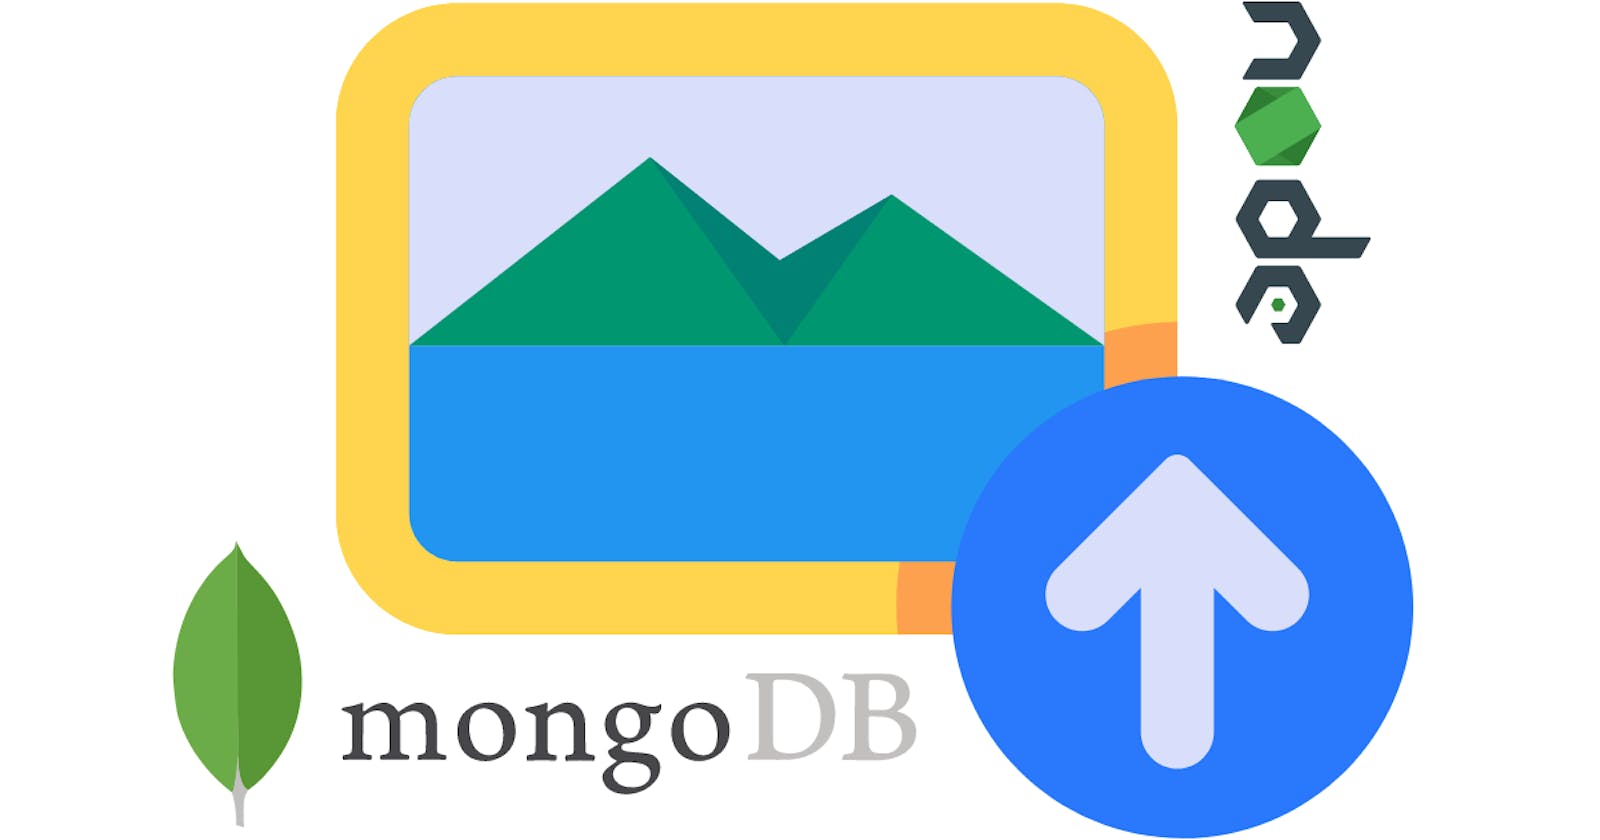 Image Uploads and Storage in MongoDB: A Step-by-Step Guide with Multer and GridFS